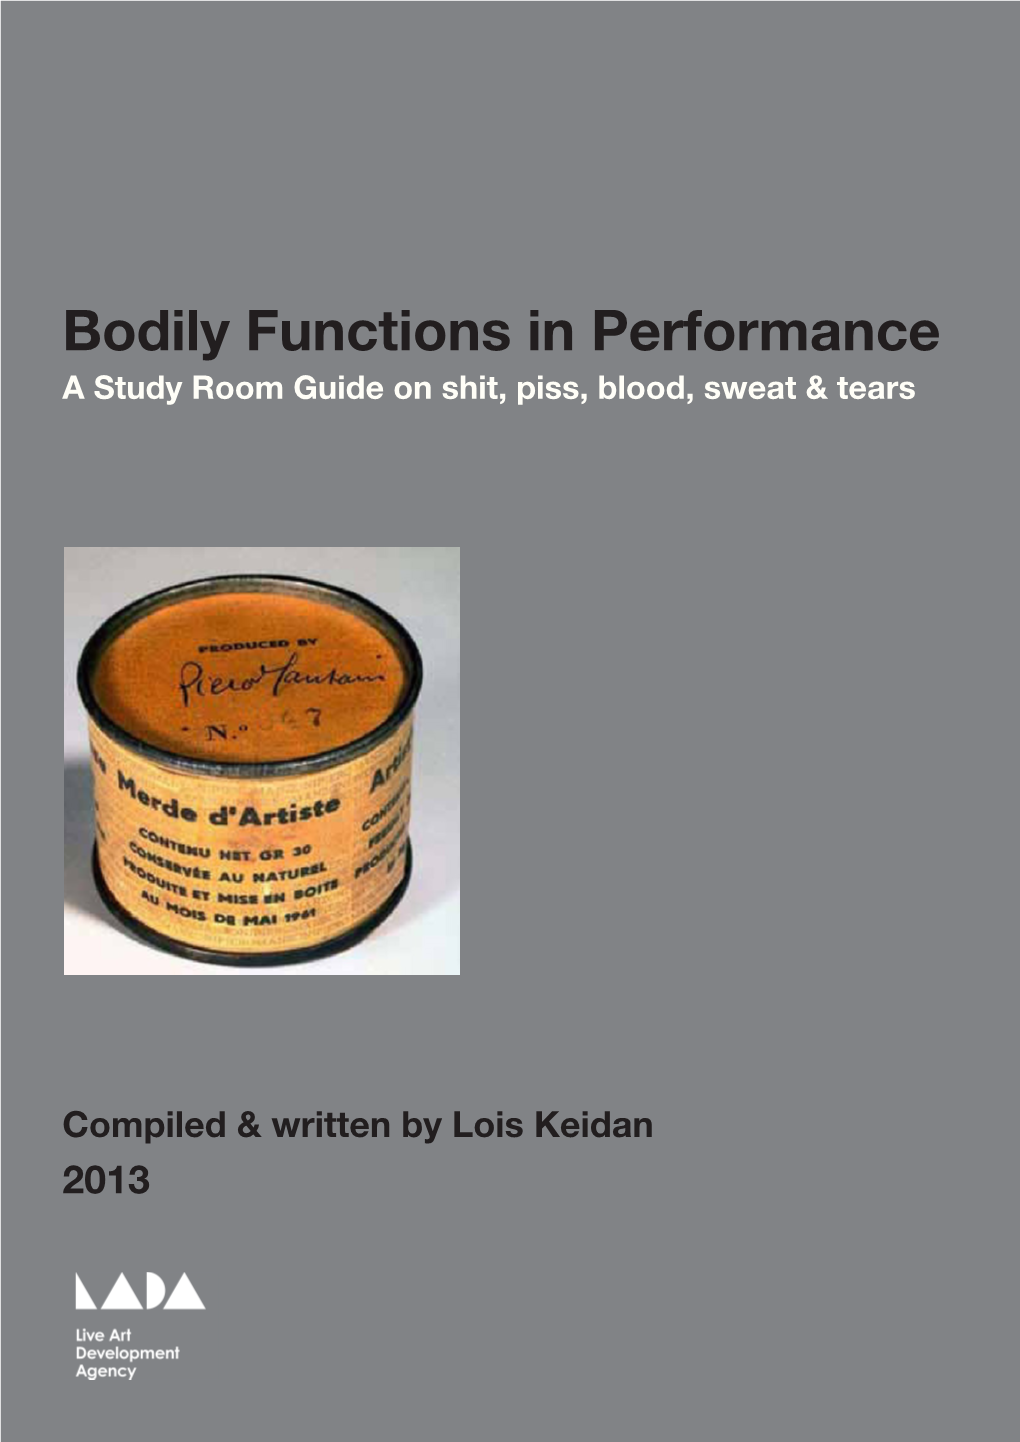 Bodily Functions in Performance a Study Room Guide on Shit, Piss, Blood, Sweat & Tears